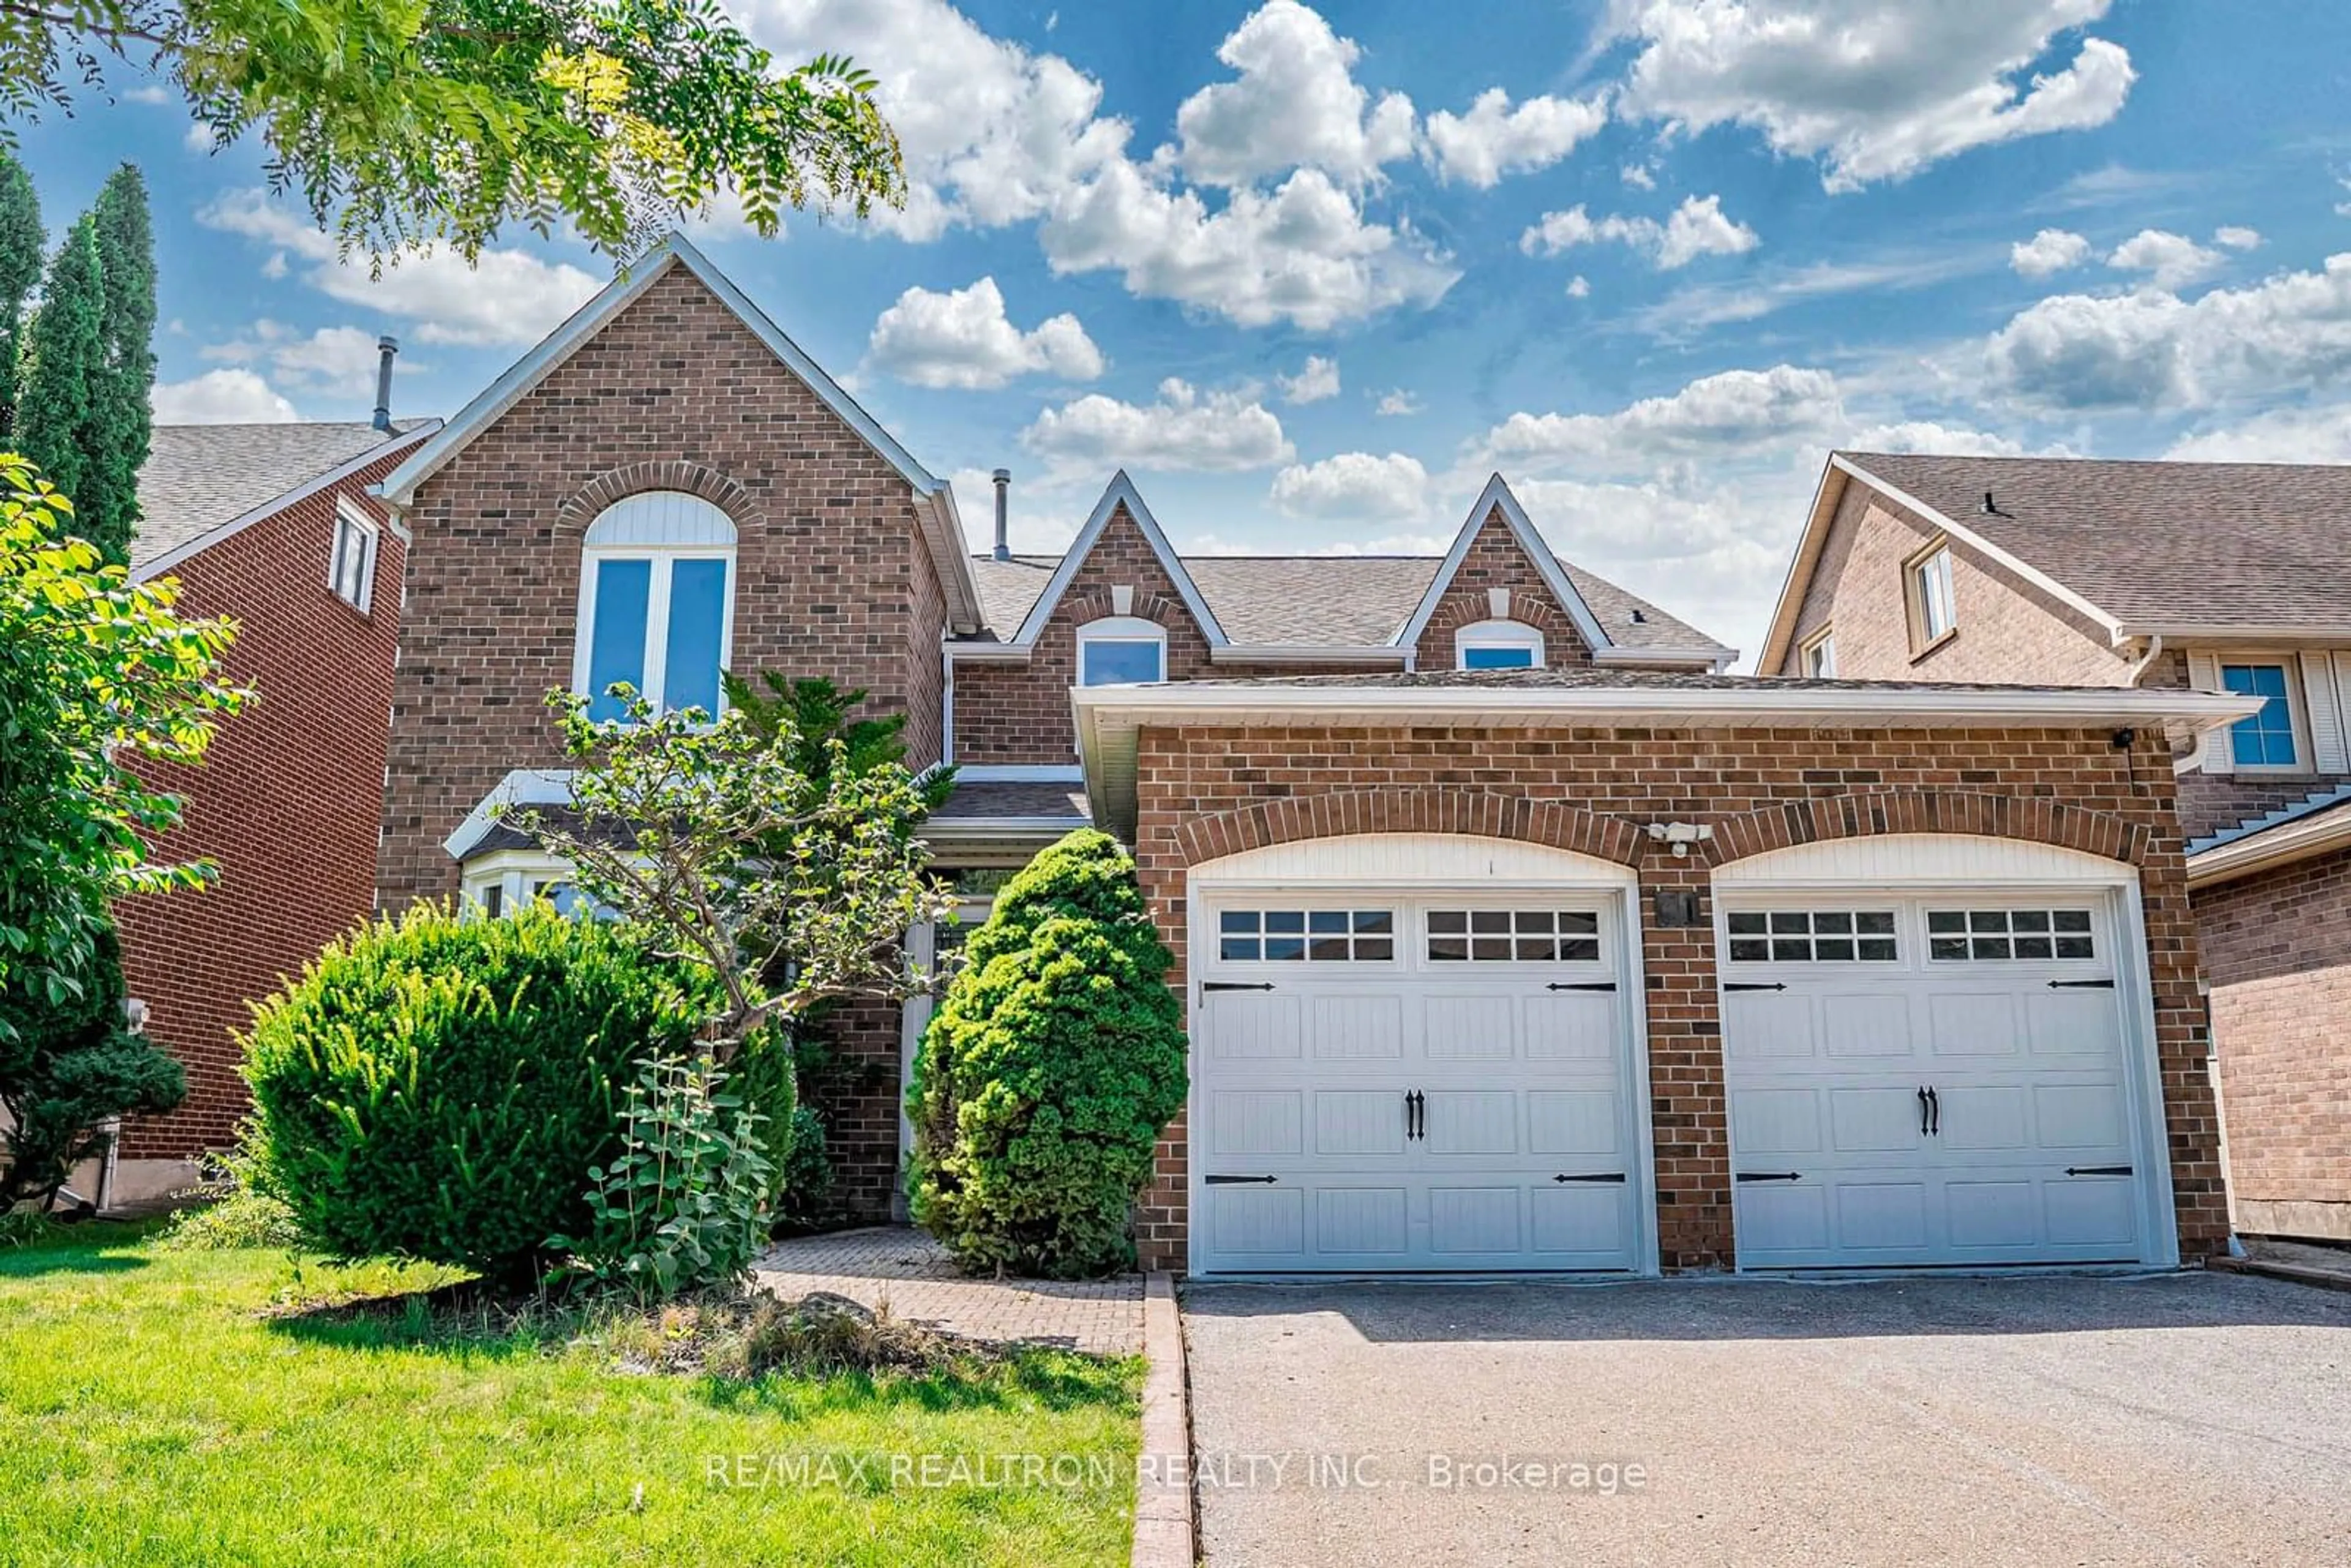 Home with brick exterior material for 31 Fairholme Dr, Markham Ontario L3R 7R8